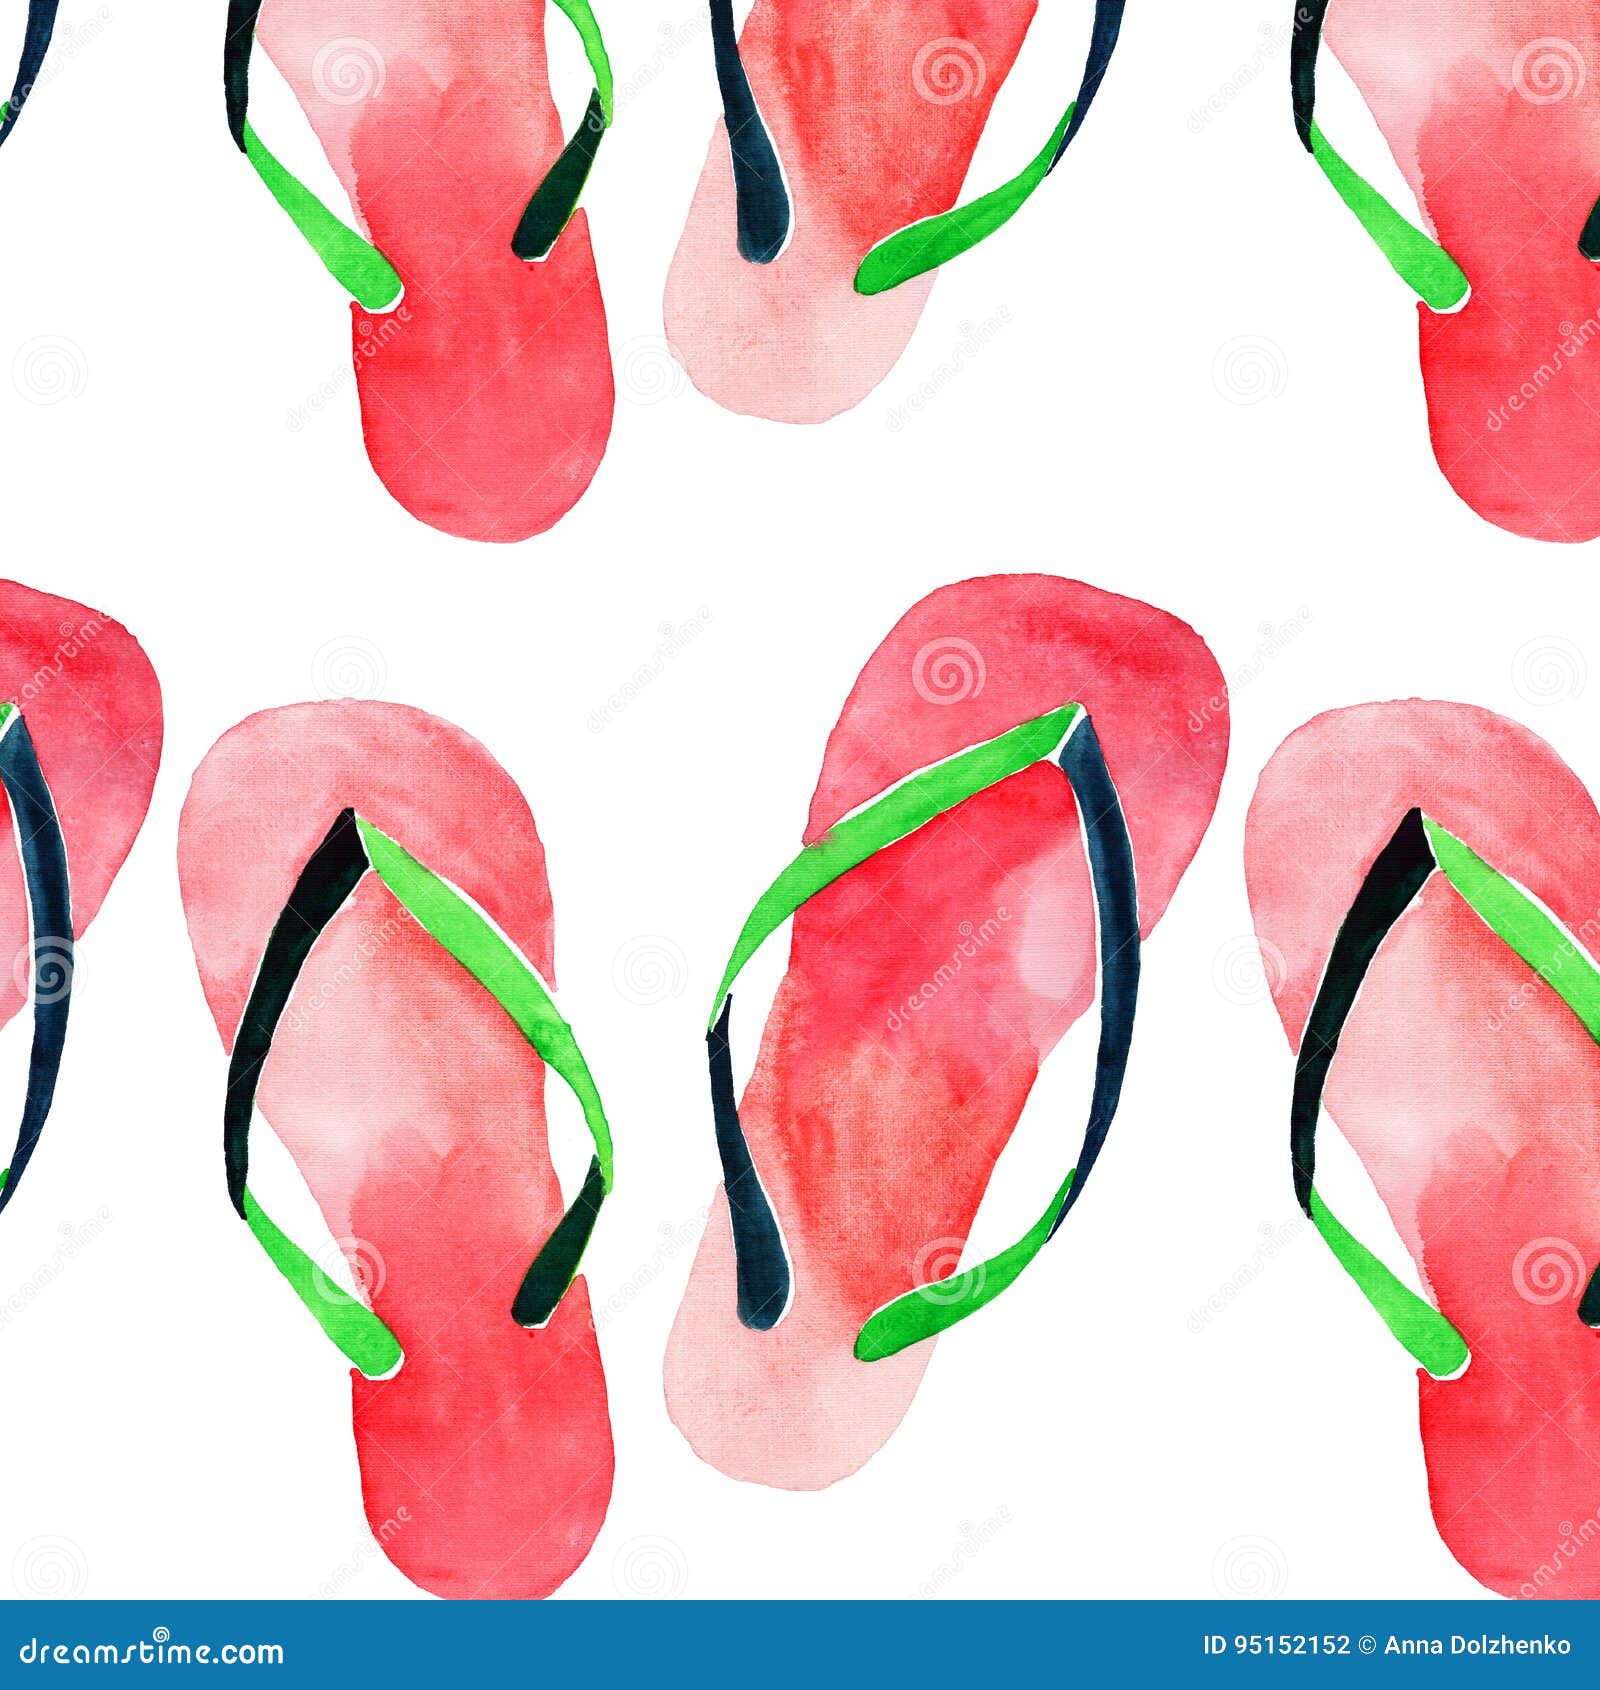 red and green flip flops